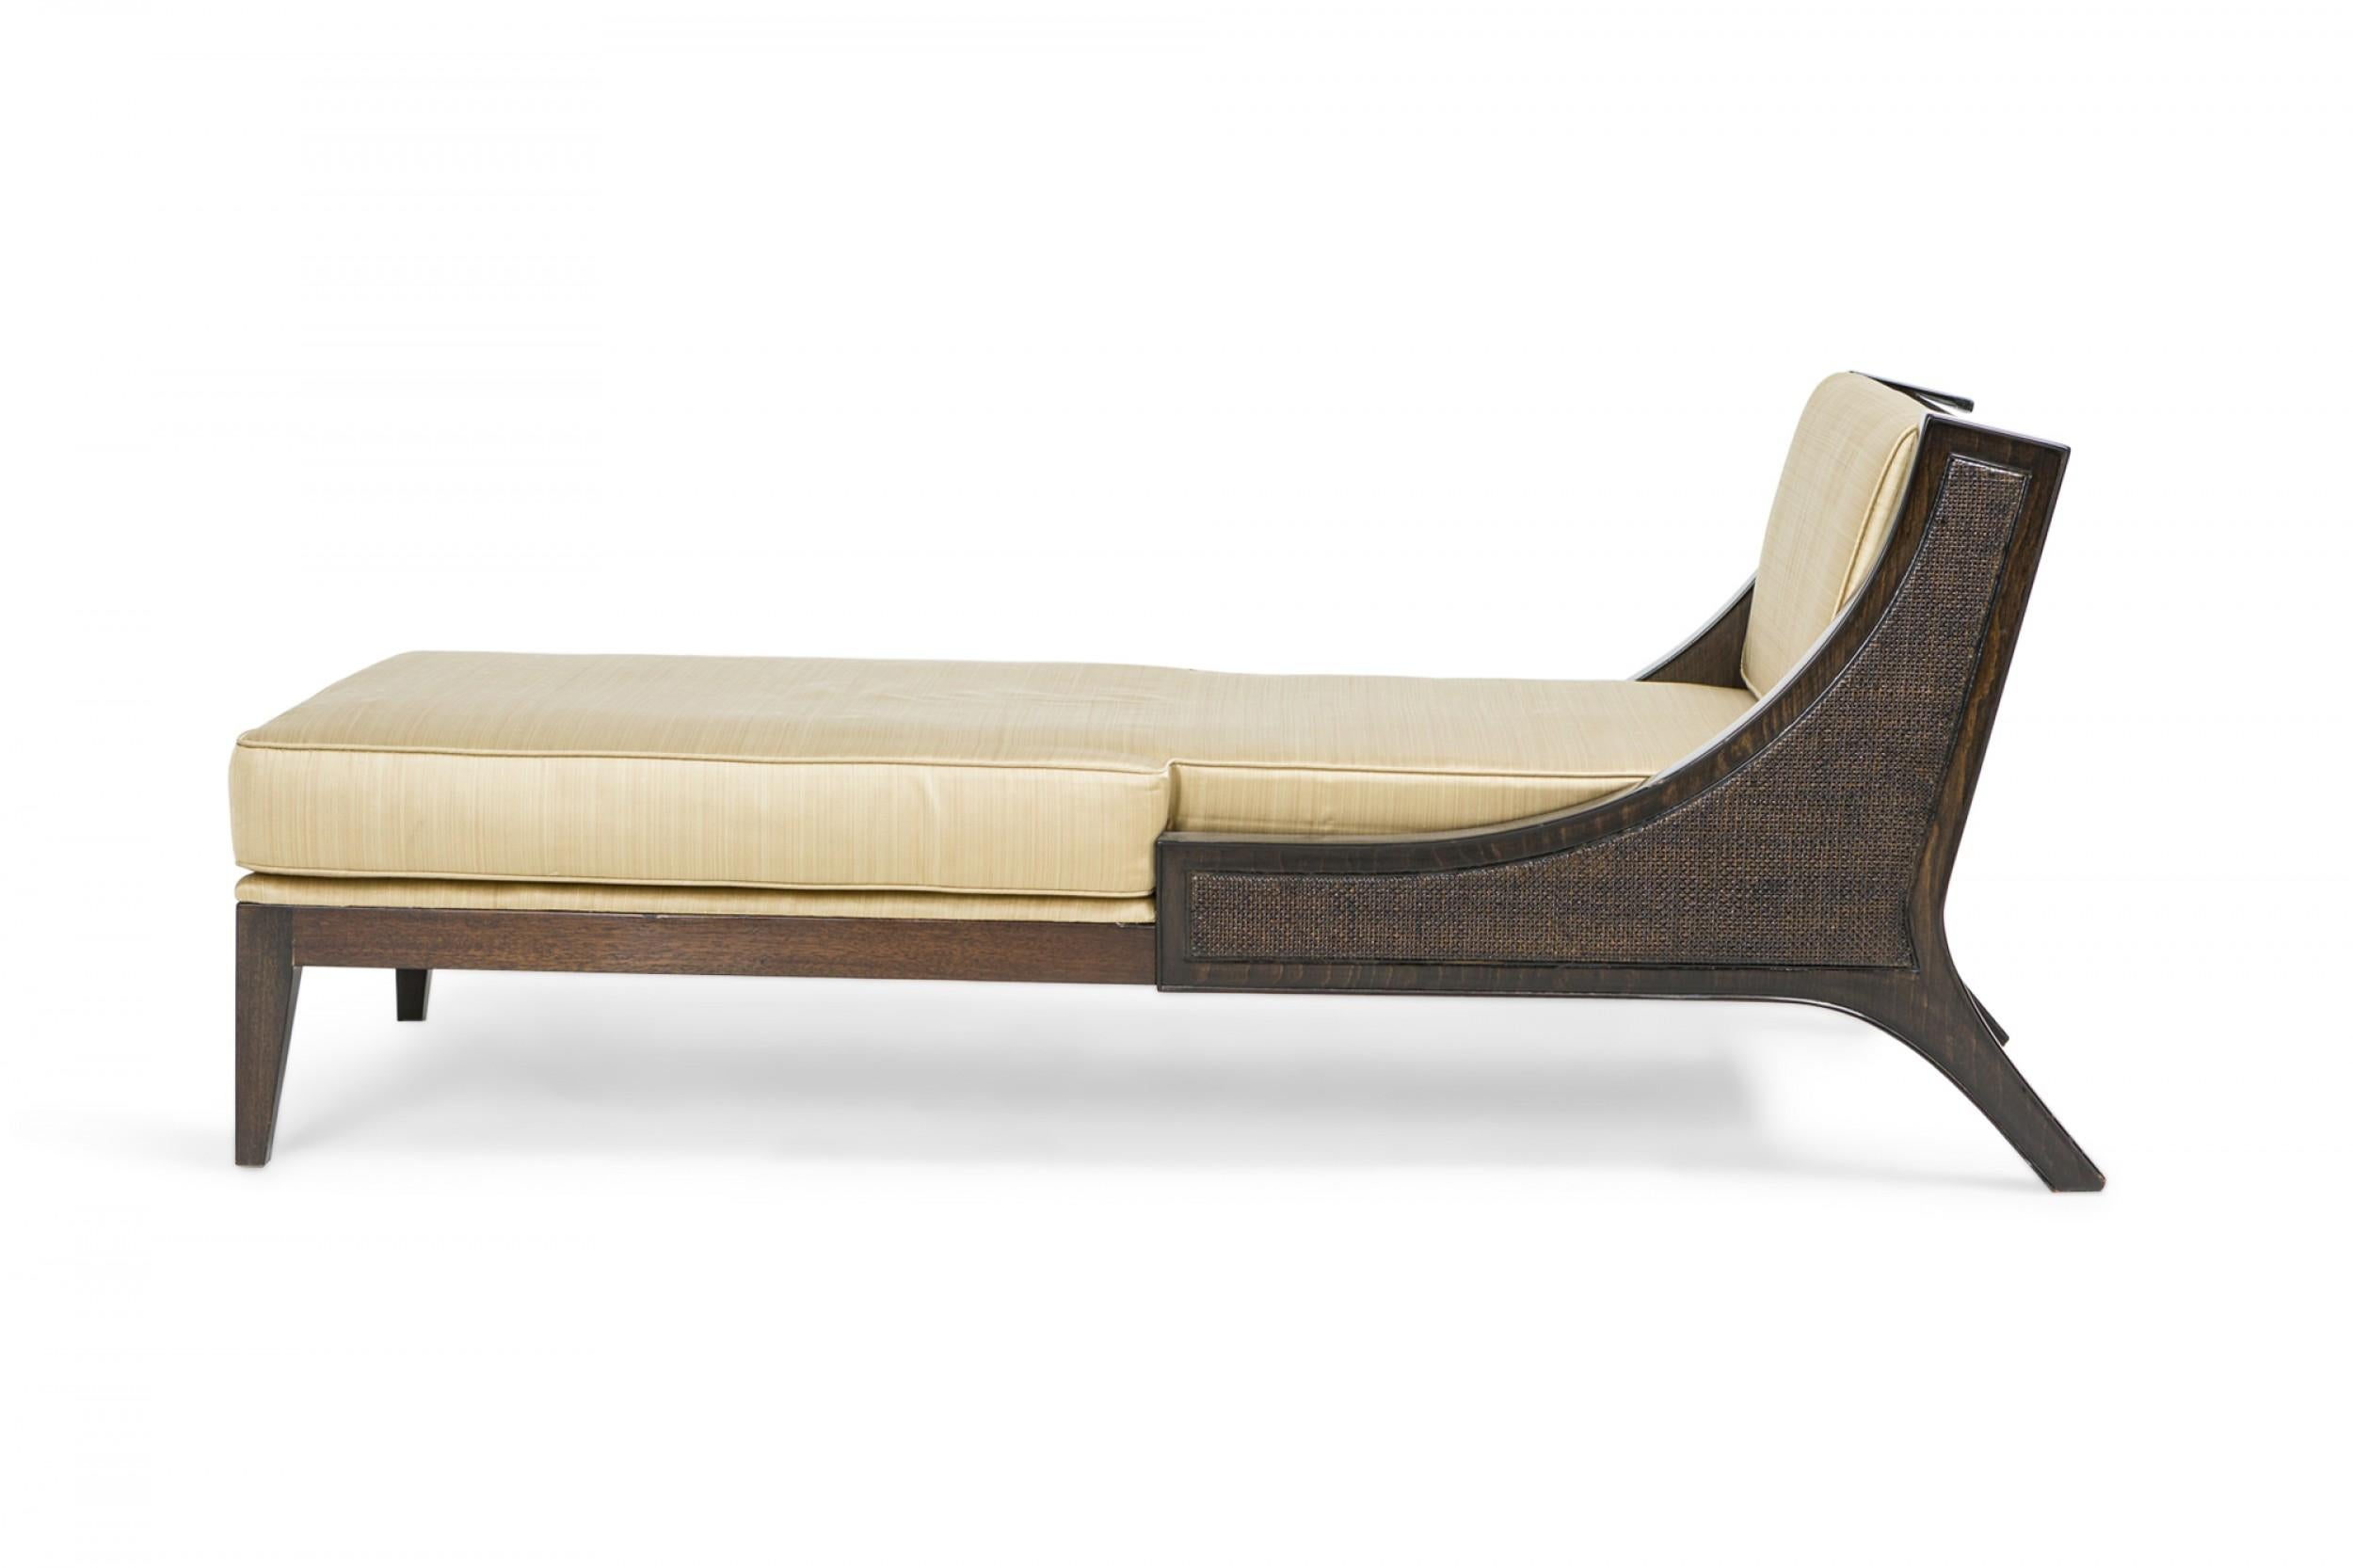 German mid-century chaise lounge with an ebonized wooden frame with caned sides and back, and back and seat cushions upholstered in gold satin fabric. (Tommi Parzinger).